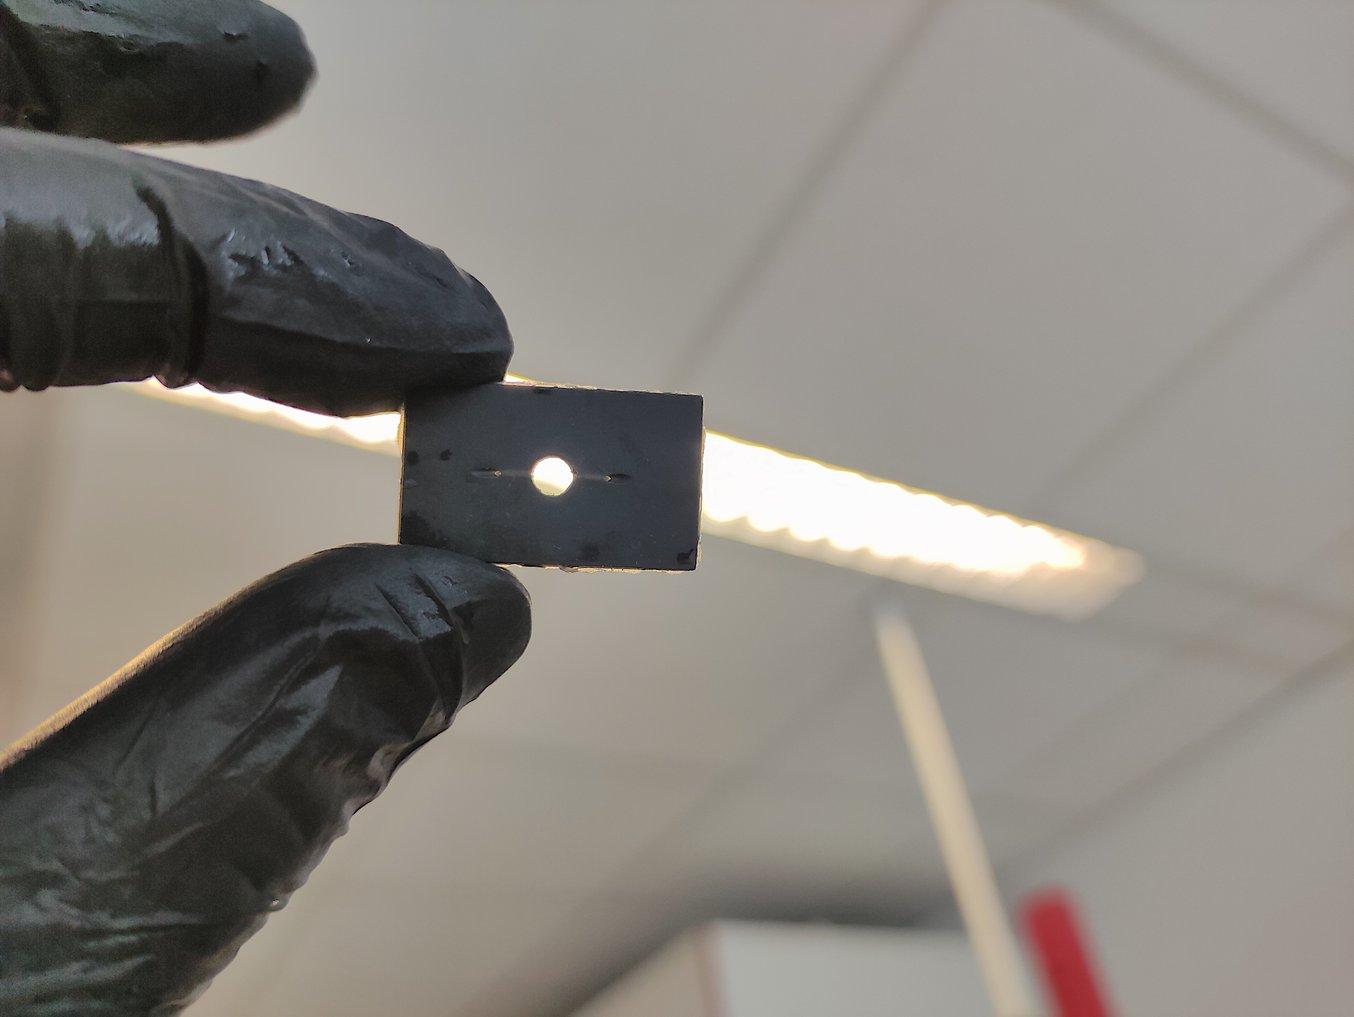 The 3D printed molecular biochips from Pixelbio offer opportunities for a variety of new applications and rapid research.